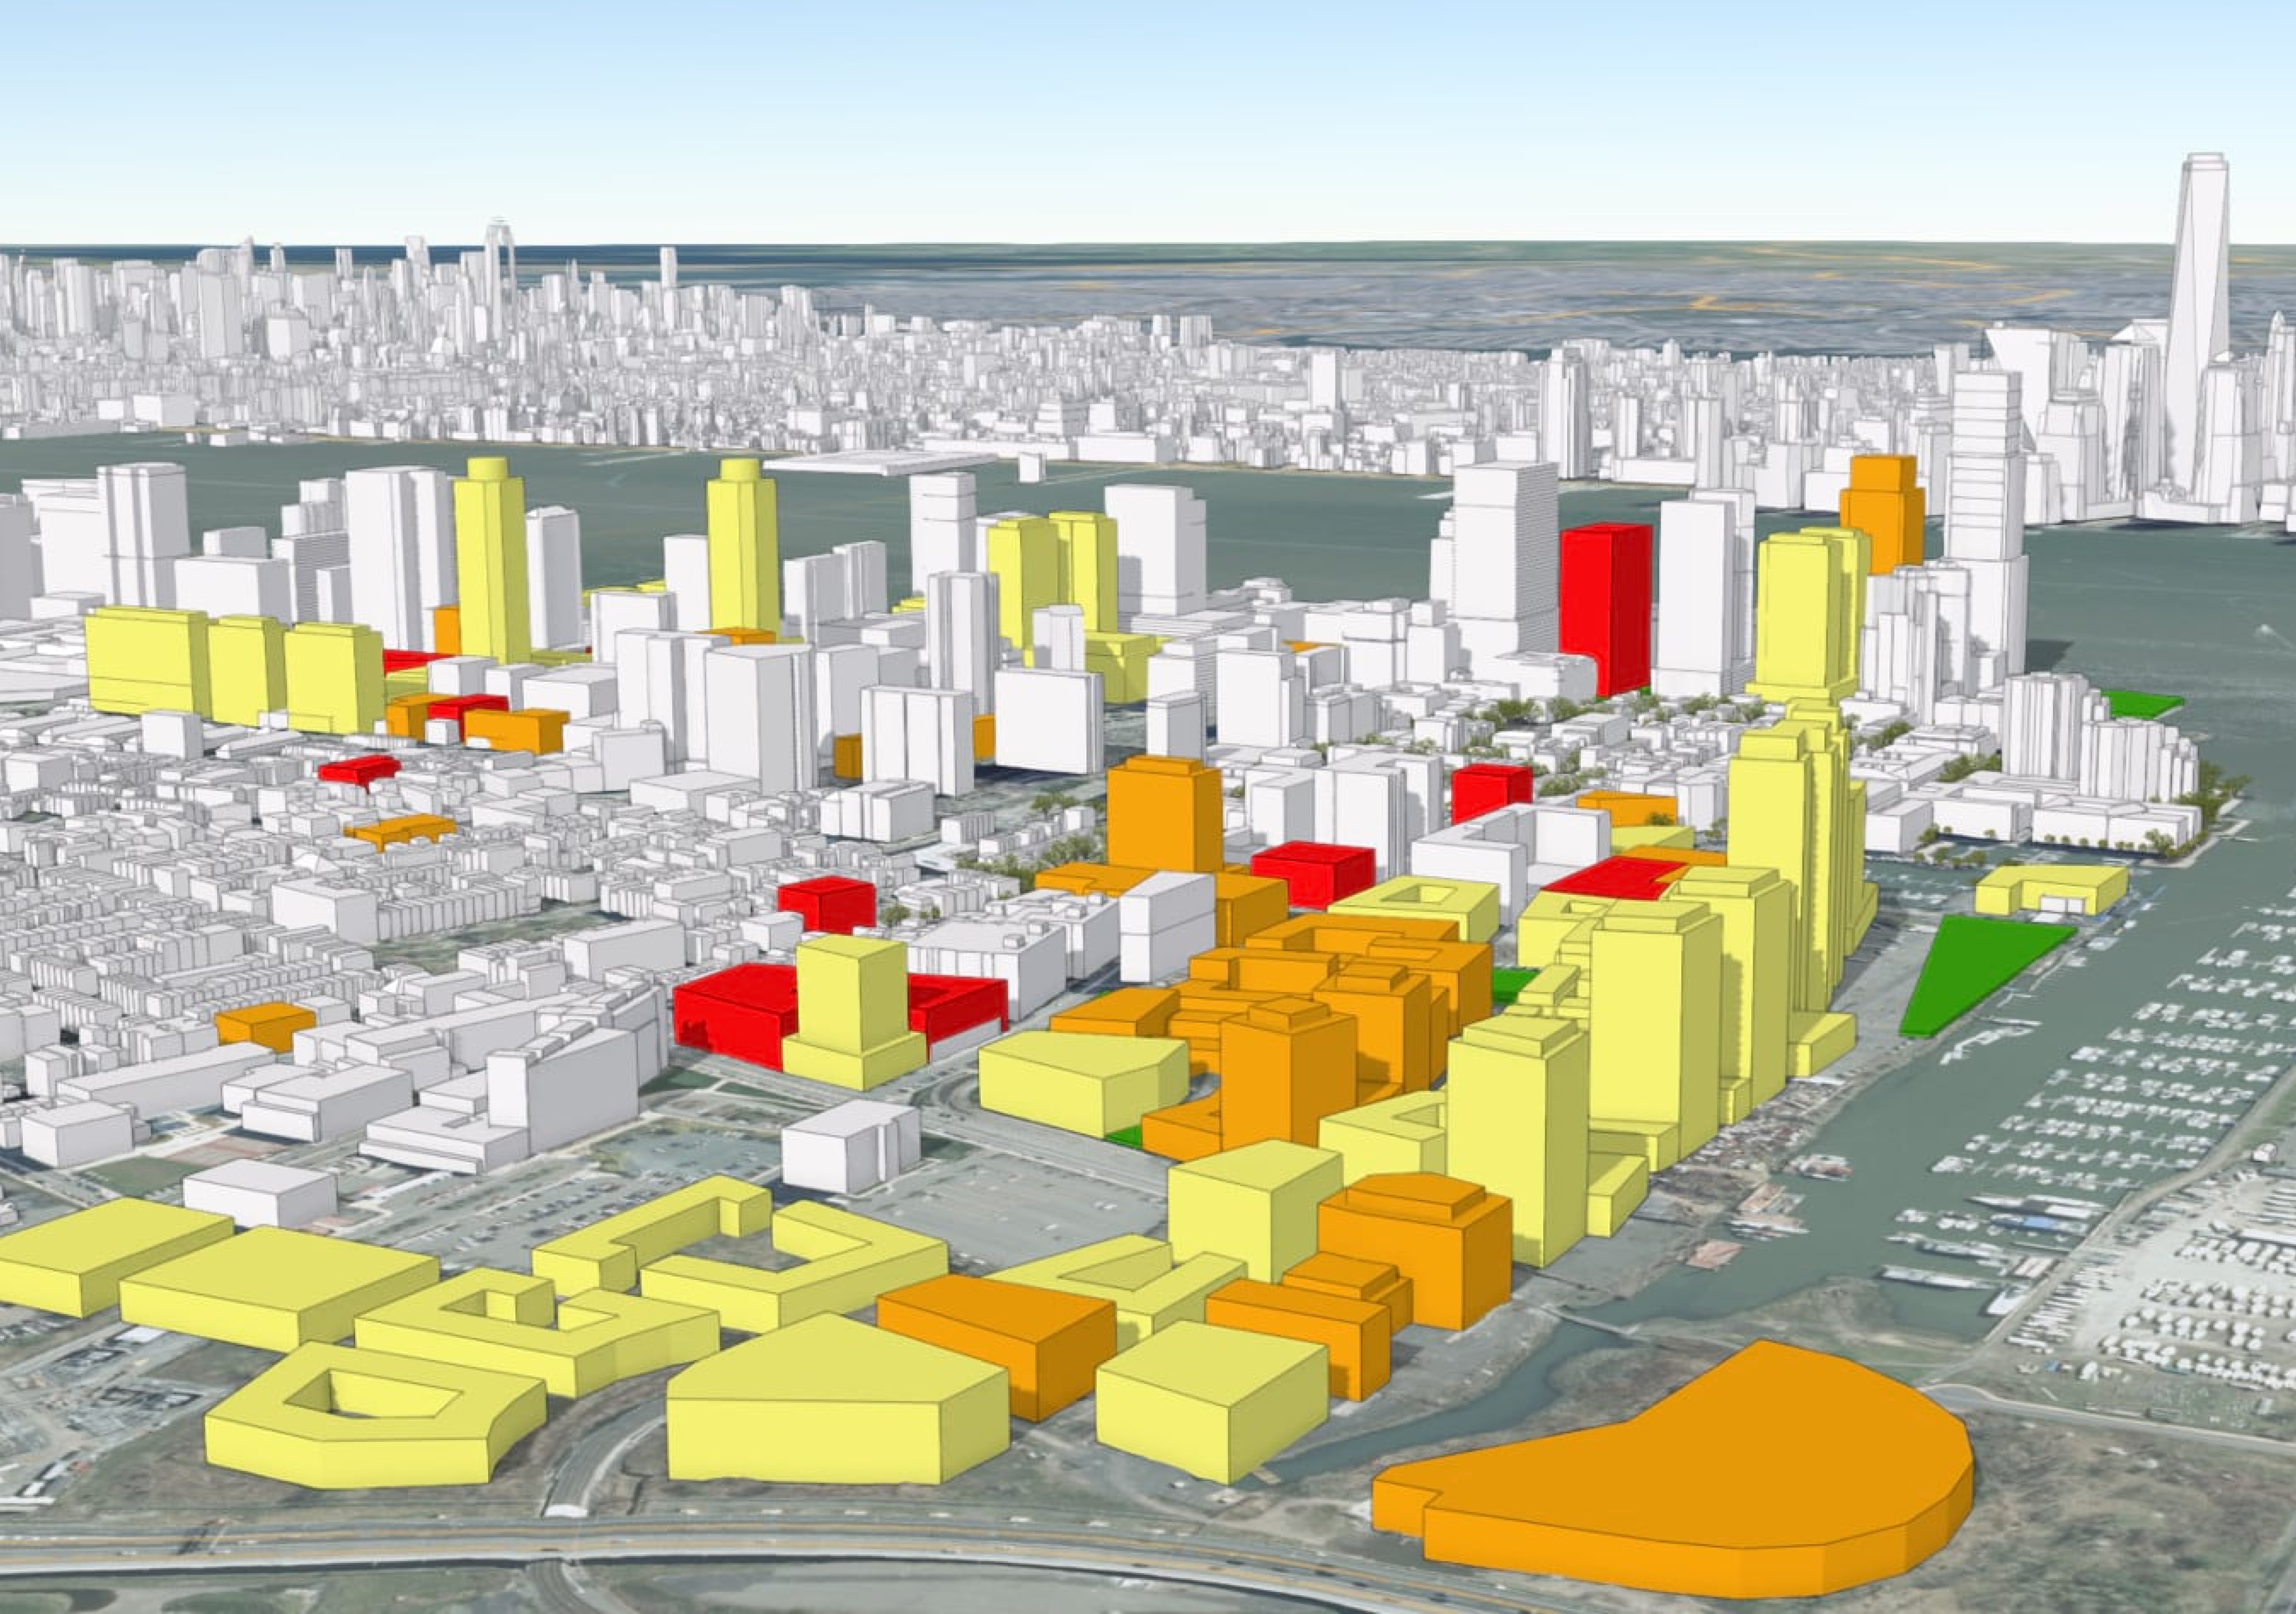 A digital model displaying buildings in parts of New Jersey and Manhattan, New York, in 3D